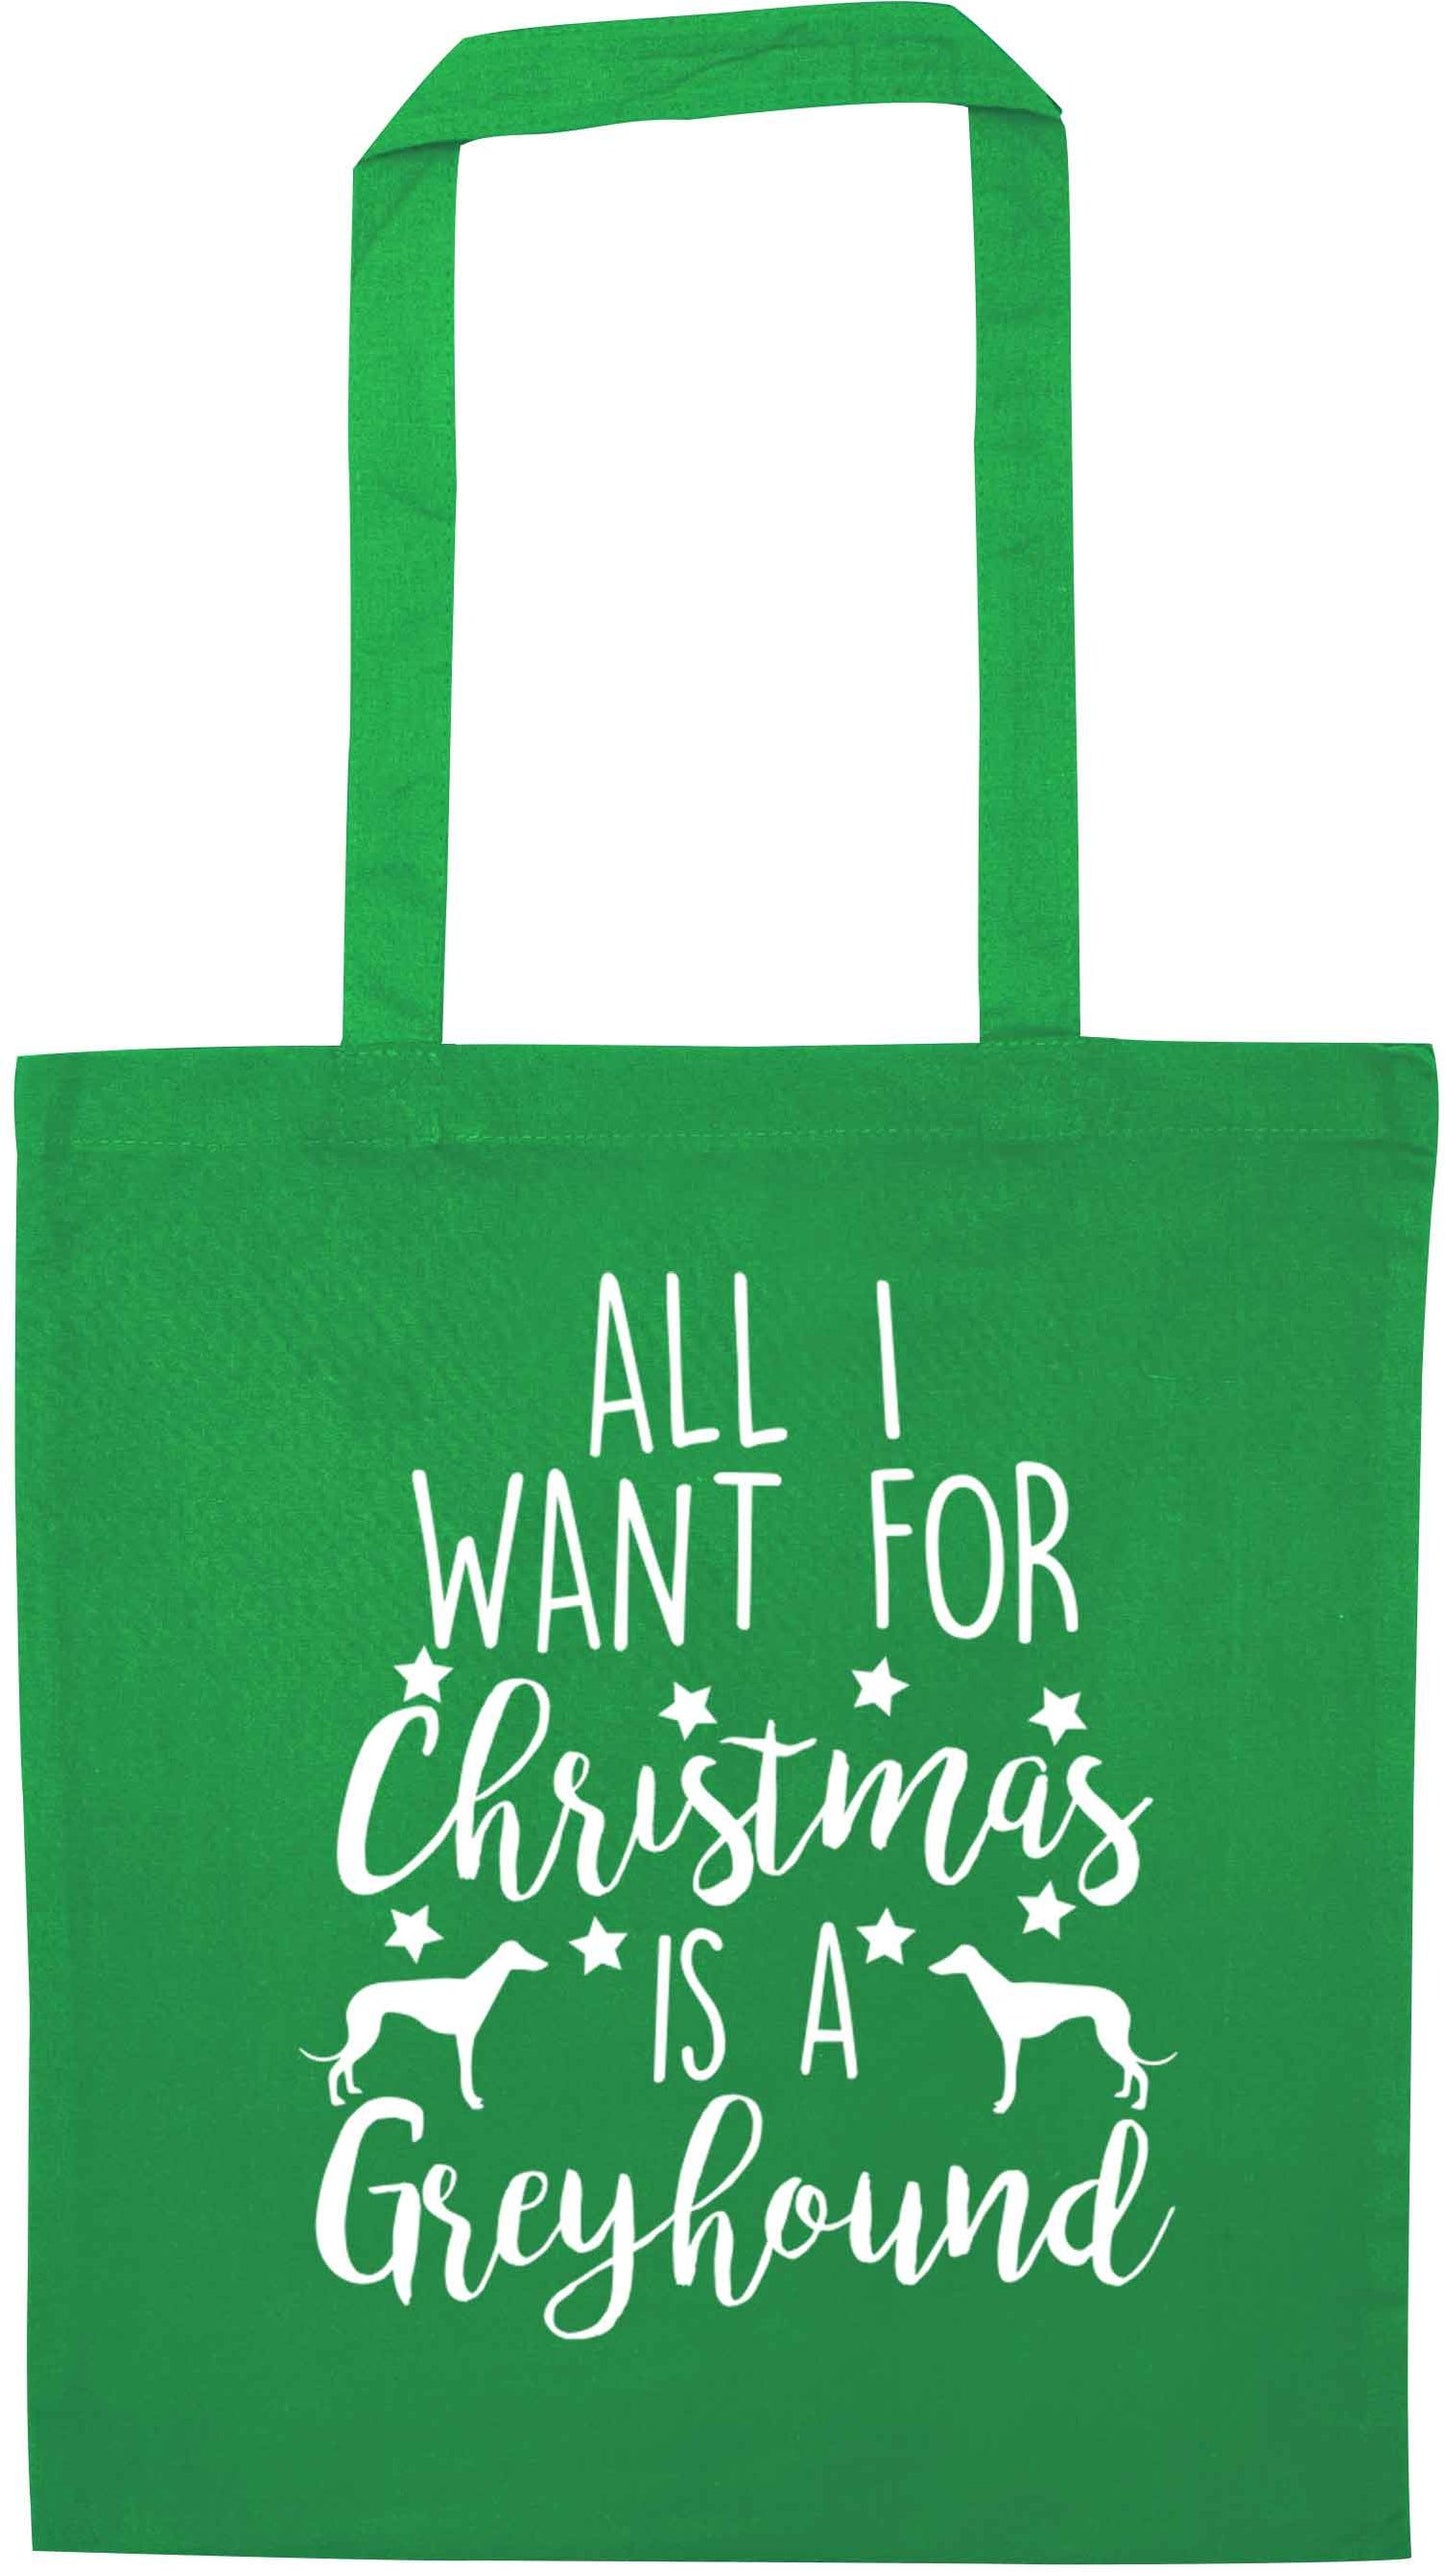 All I want for Christmas is a greyhound green tote bag